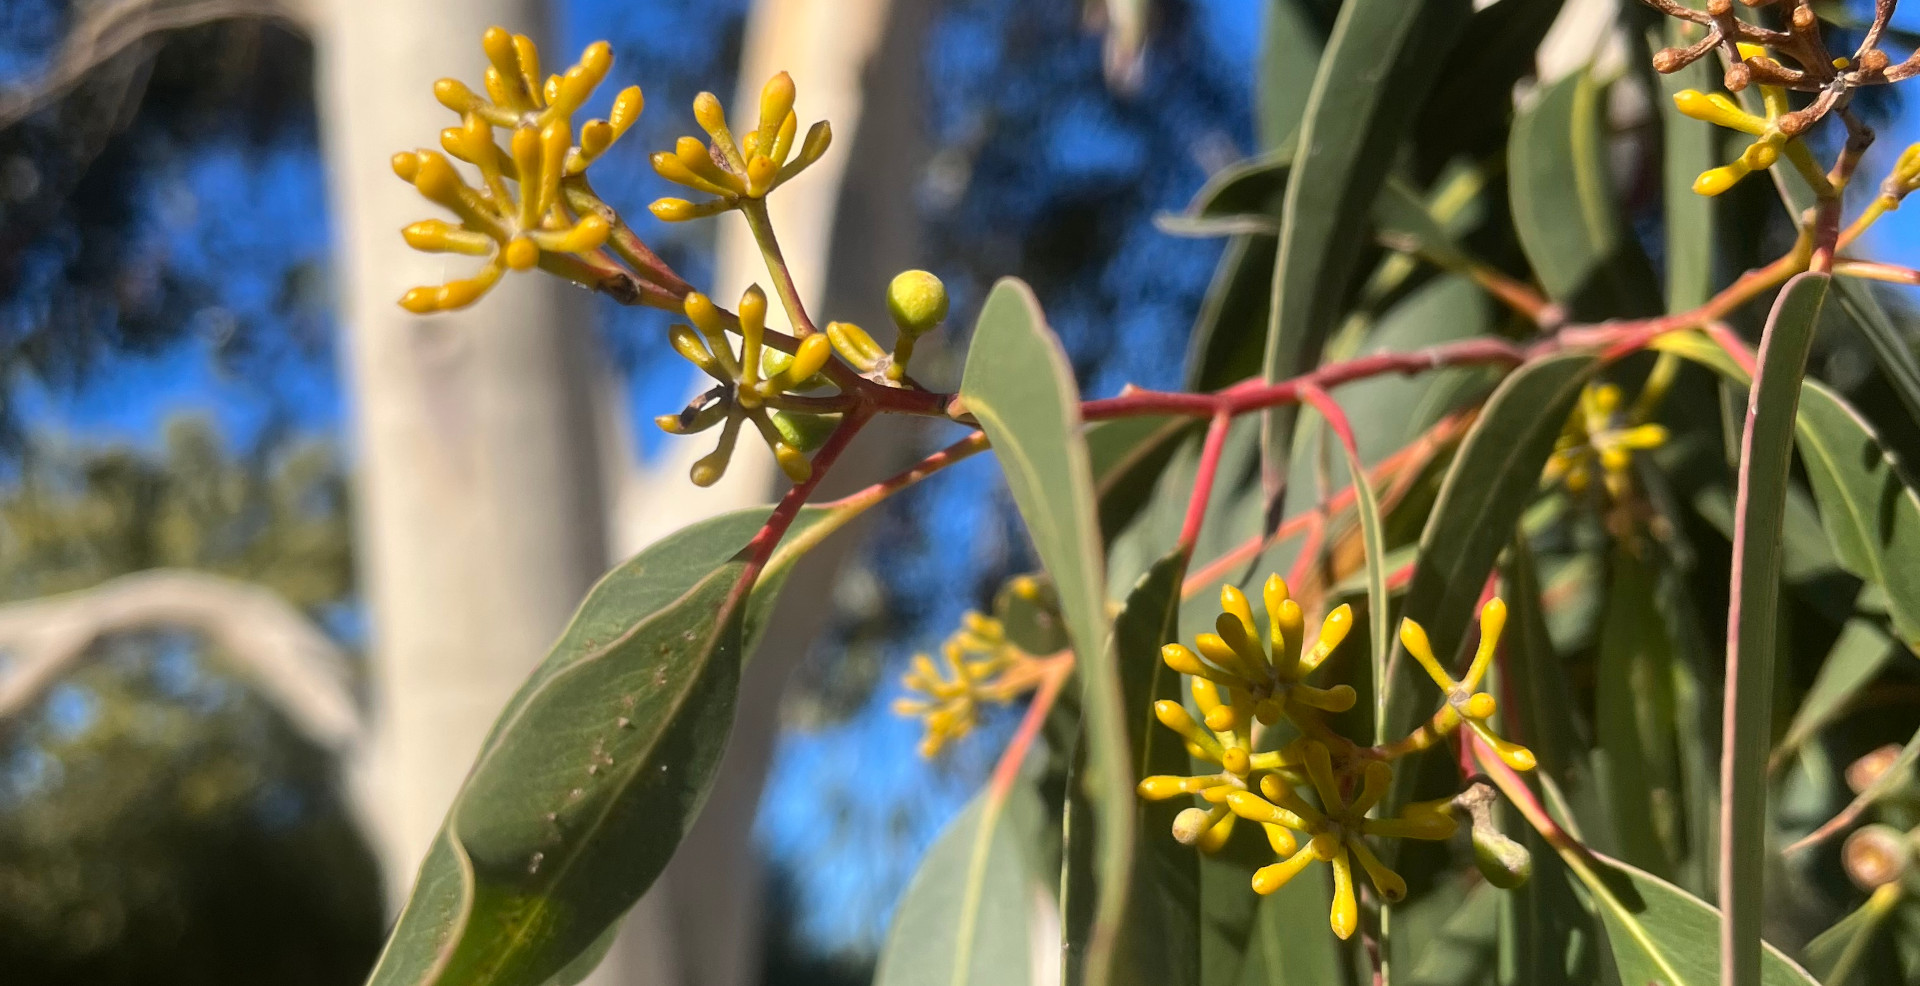 Native eucalyptus tree leaves and flower buds.